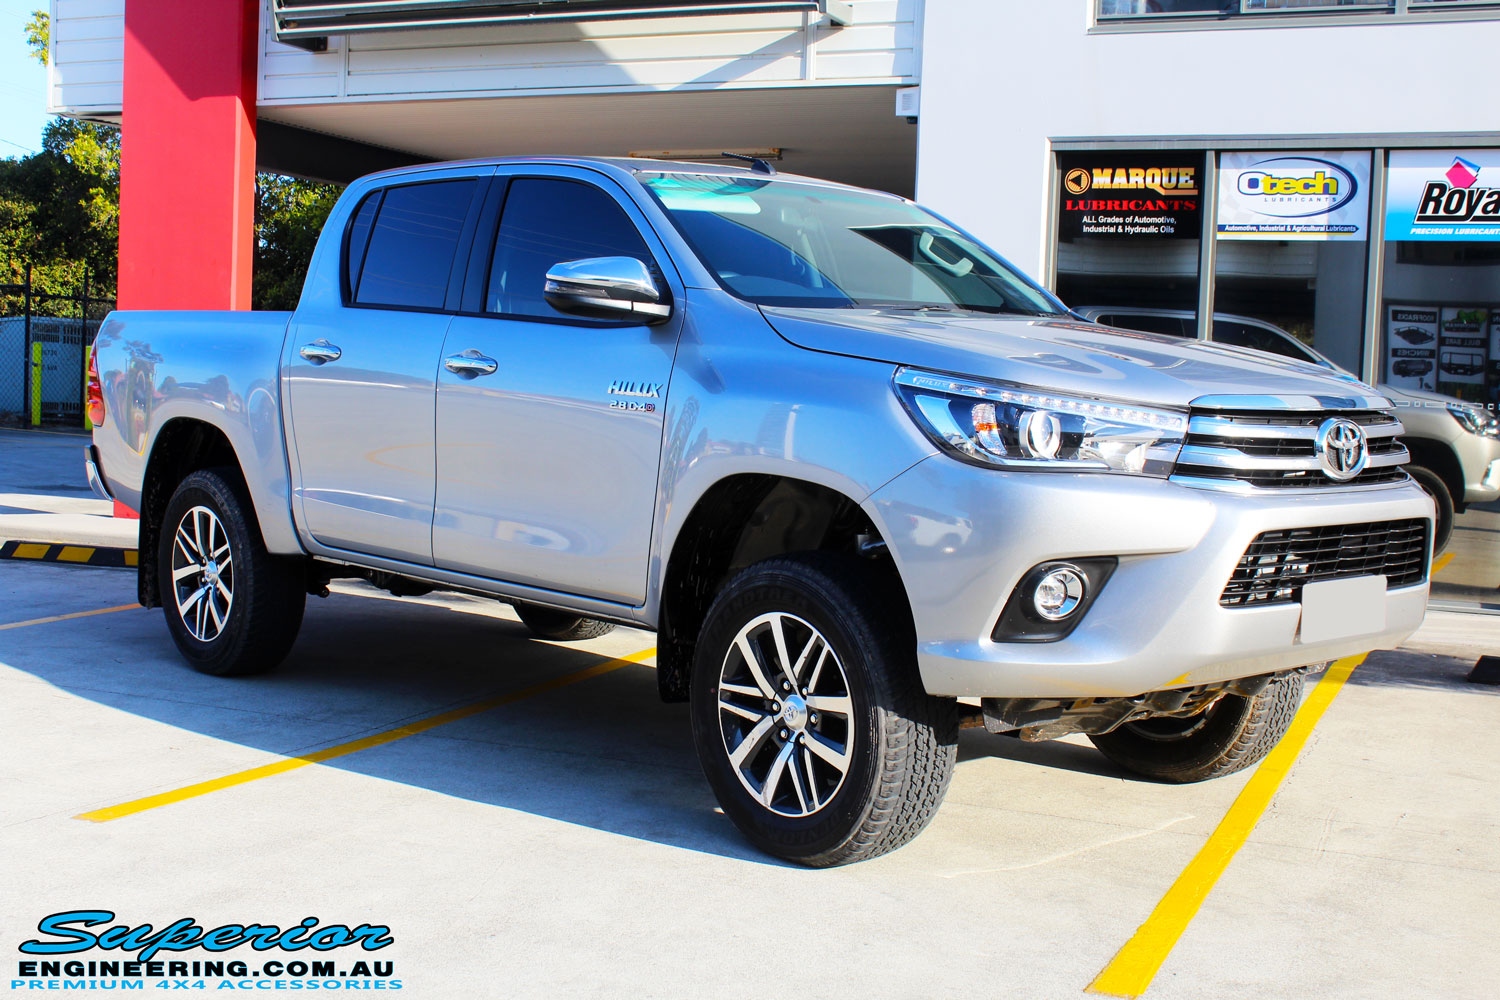 Right front side view of a Silver Toyota Revo Hilux Dual Cab after fitment of a range of Superior and various other brands suspension components